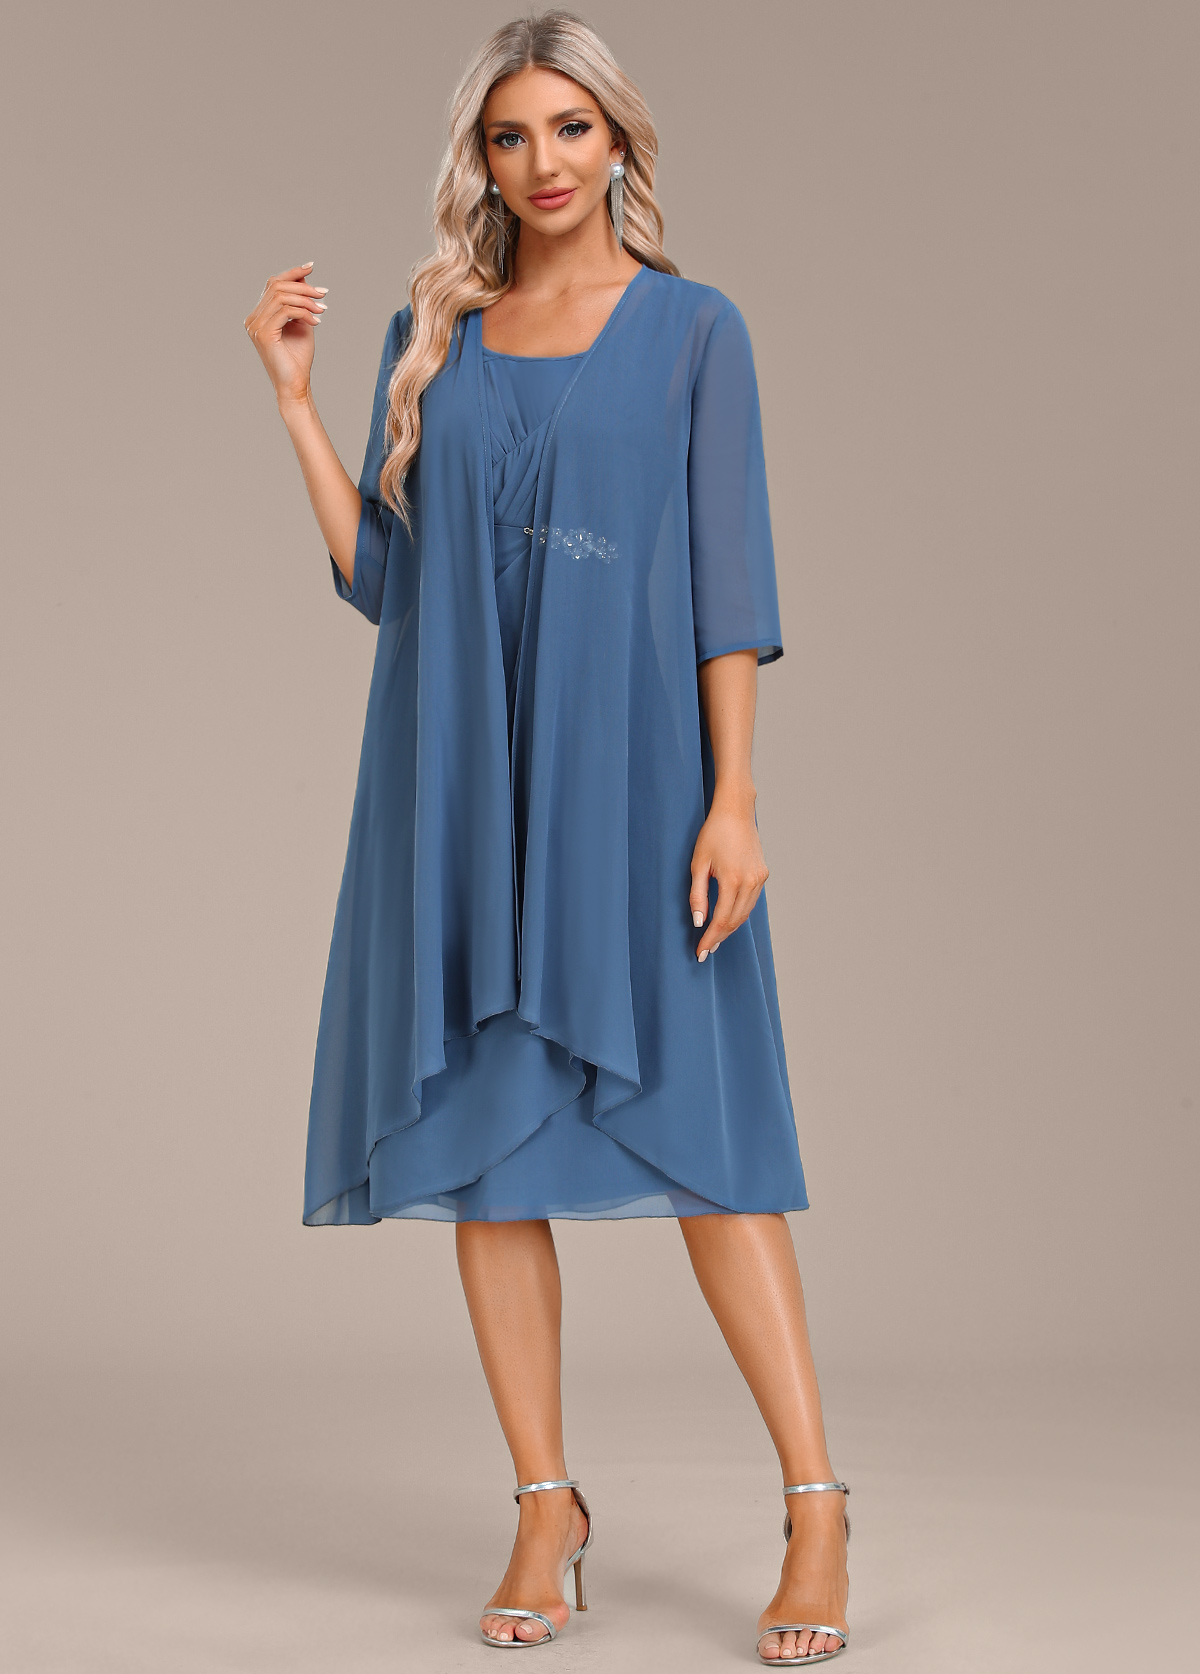 Hot Drilling Blue Round Neck Dress and Cardigan | Rosewe.com - USD $47.98